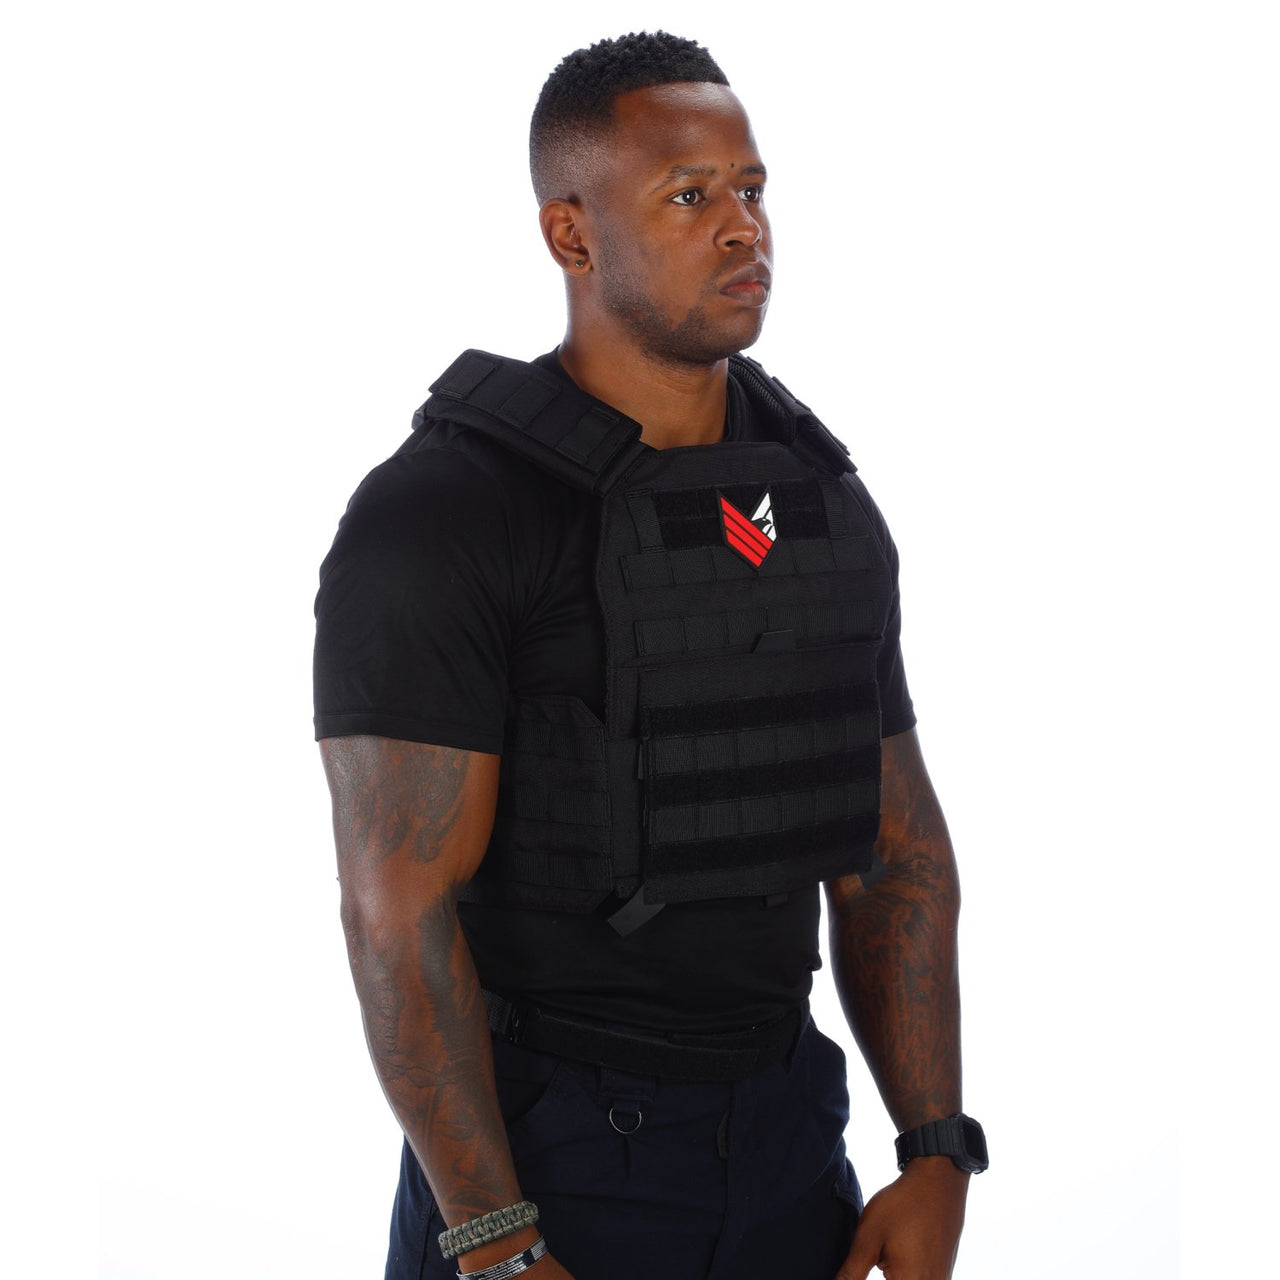 A black man wearing a Body Armor Direct Advanced Body Armor Plate Carrier with Cummerbund on a white background.